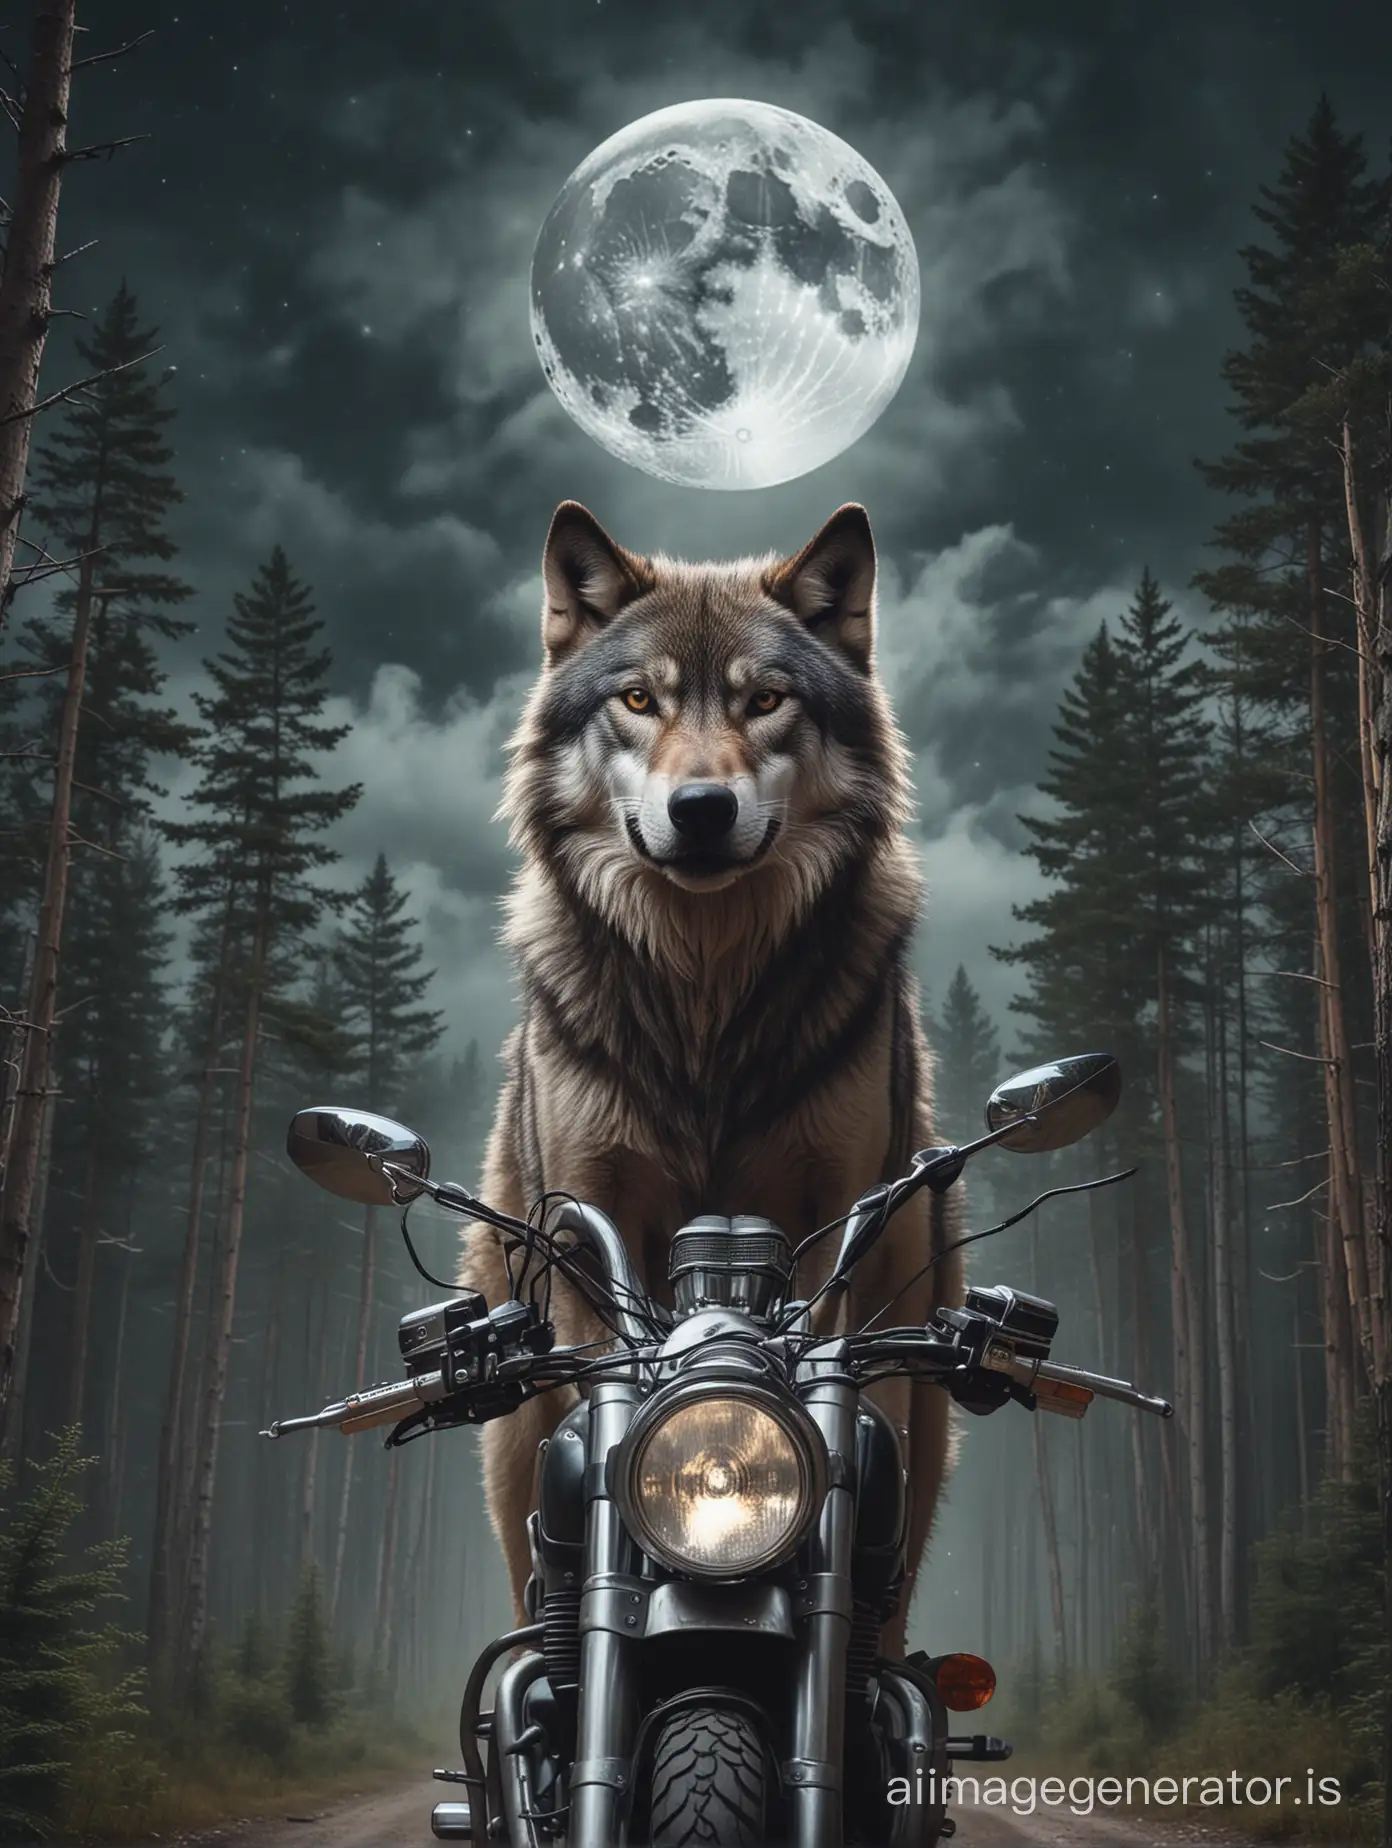 Wolf head. Big motorcycle at the bottom. A moon in the background with the image of a howling wolf. Beautiful mountain and forest in the background. Be tall cedar trees